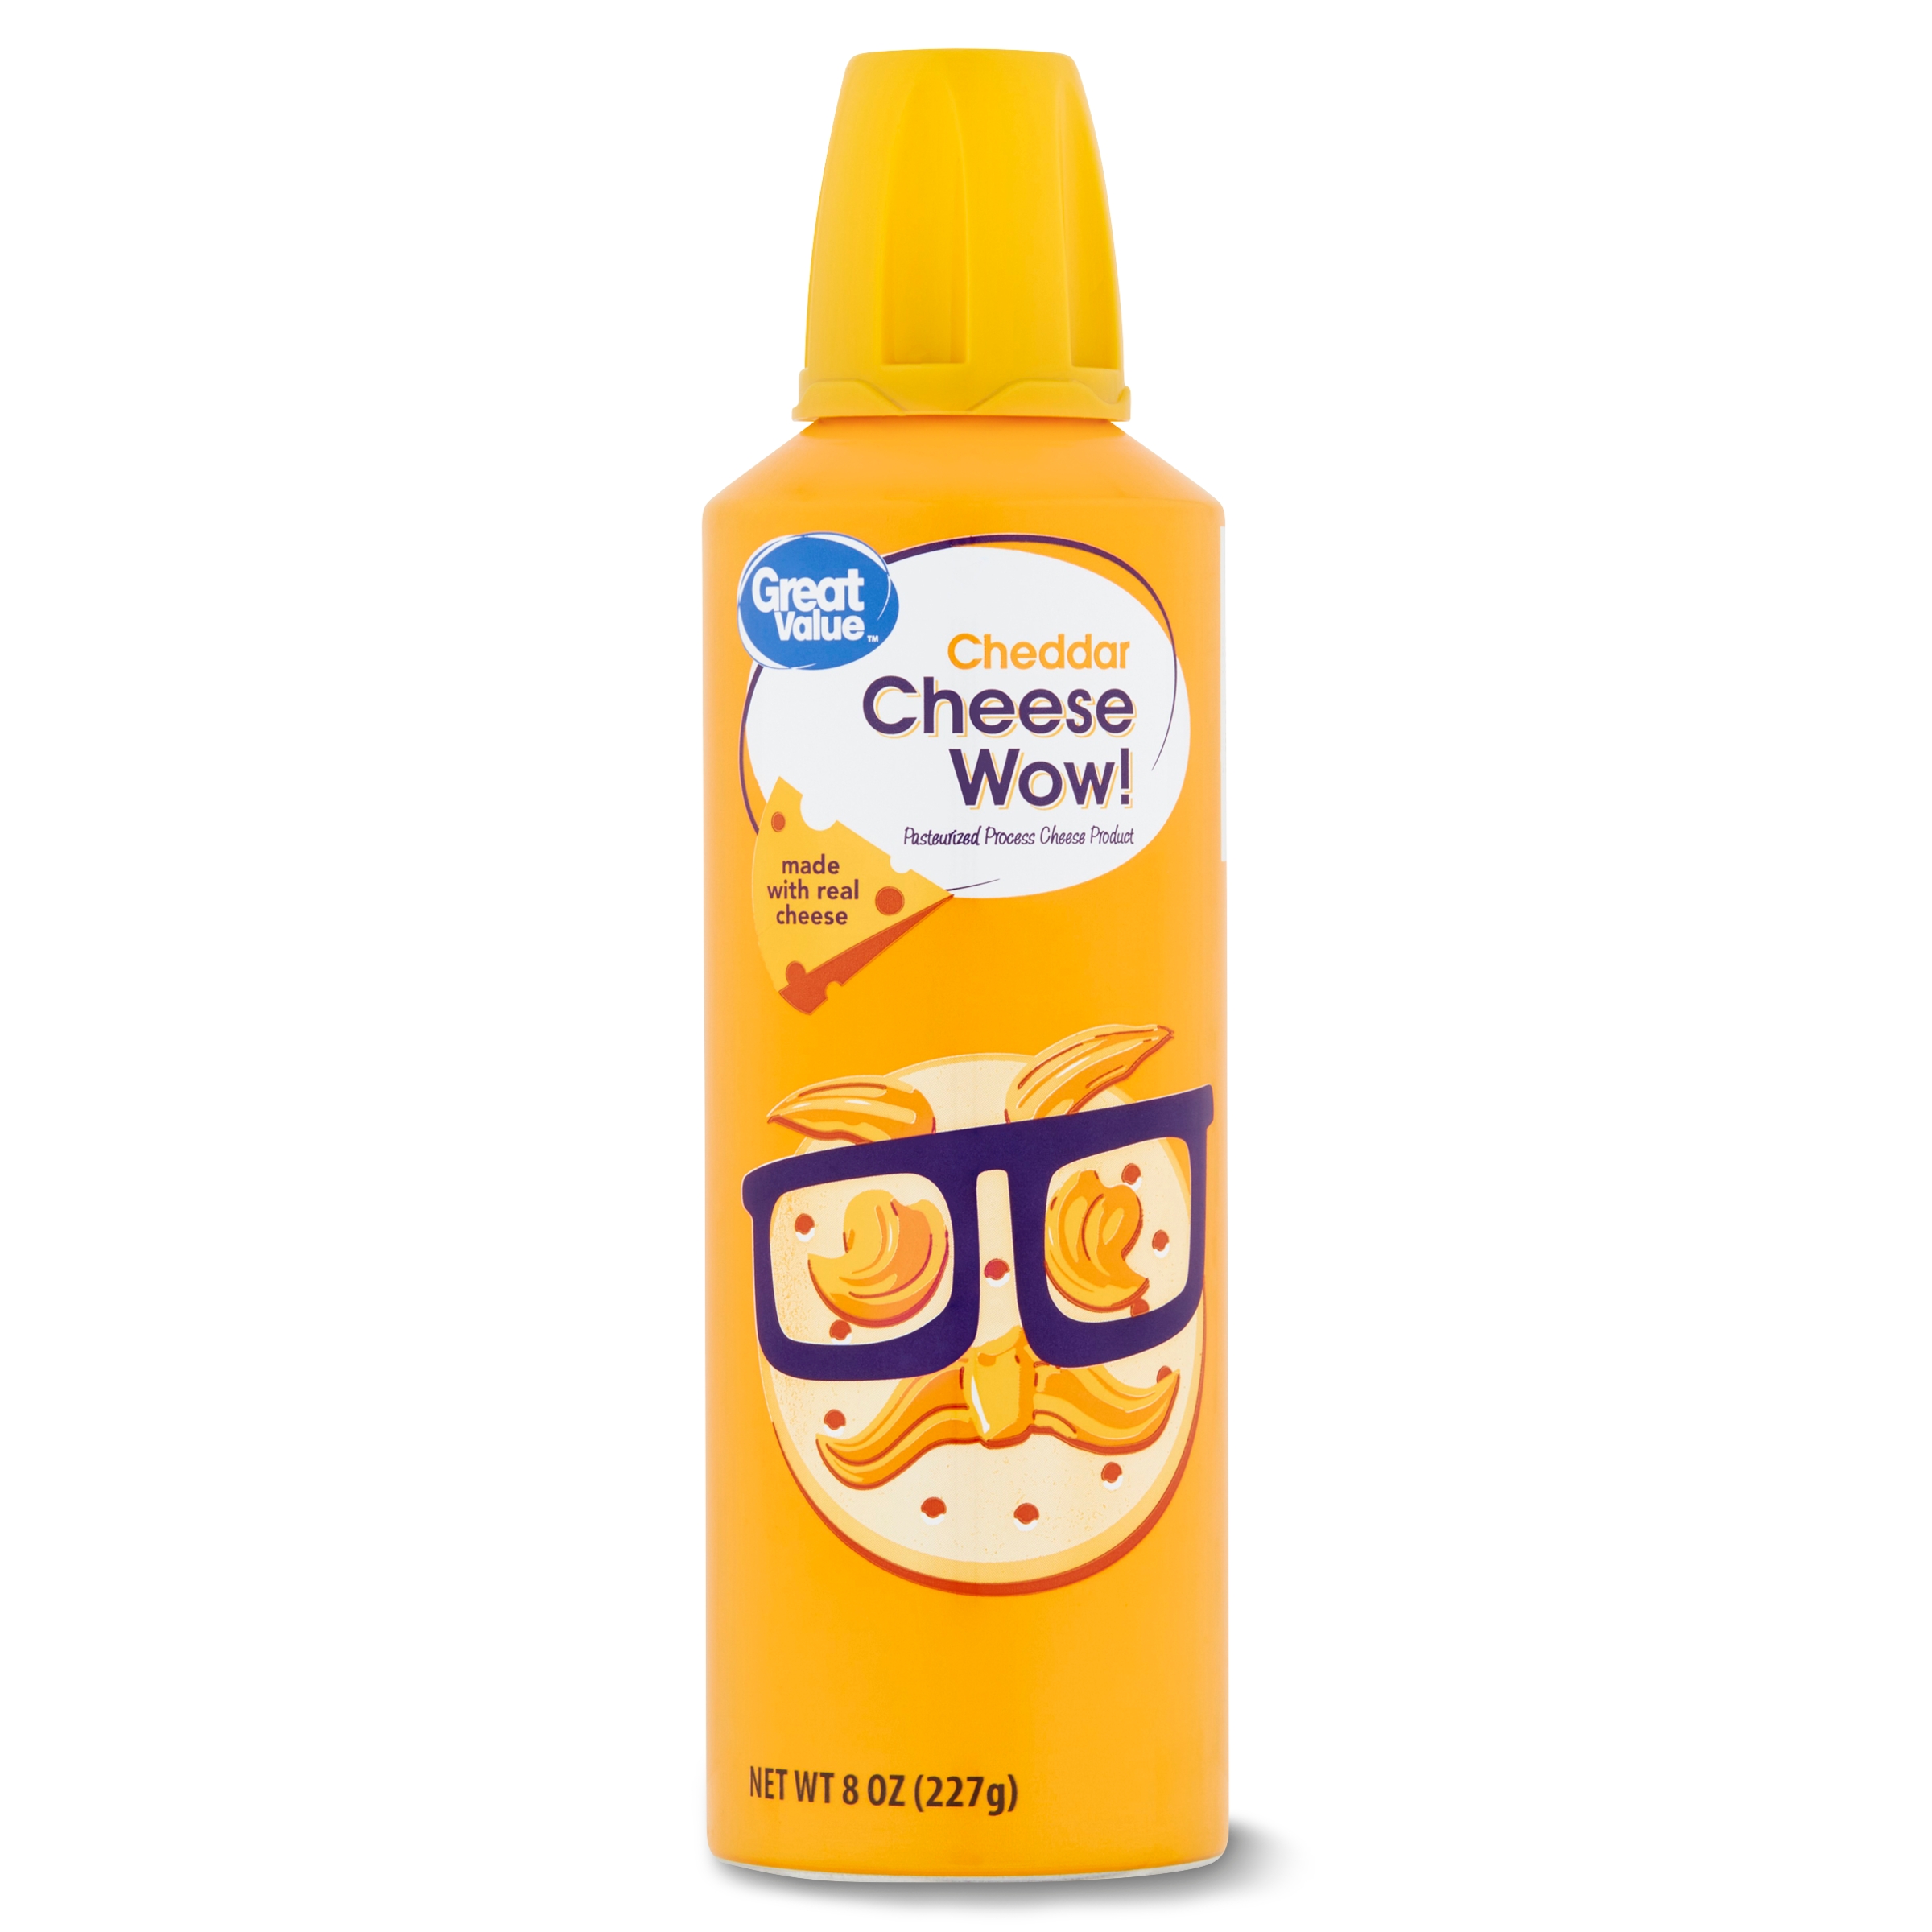 Great Value Cheese Wow! Spray Cheese, Cheddar, 8 oz Can - image 1 of 8